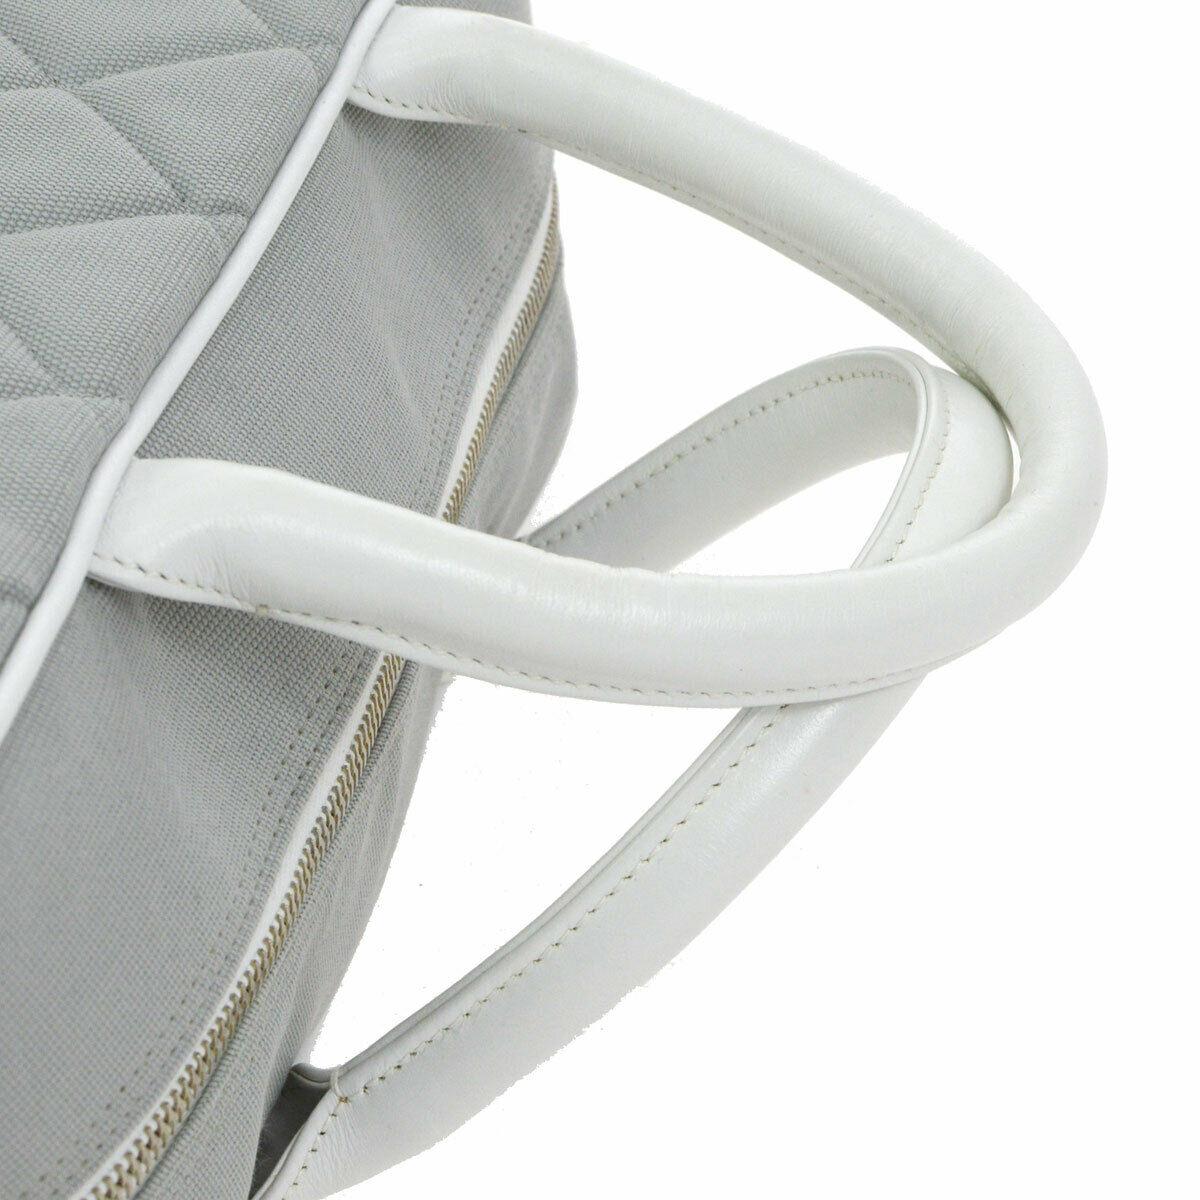 Chanel Gray White Canvas Leather Top Handle Tote Travel Carryall Bowling Bag in Box

Canvas
Leather 
Silver tone hardware 
Zipper closure
Woven lining
Made in France
Handle drop 4